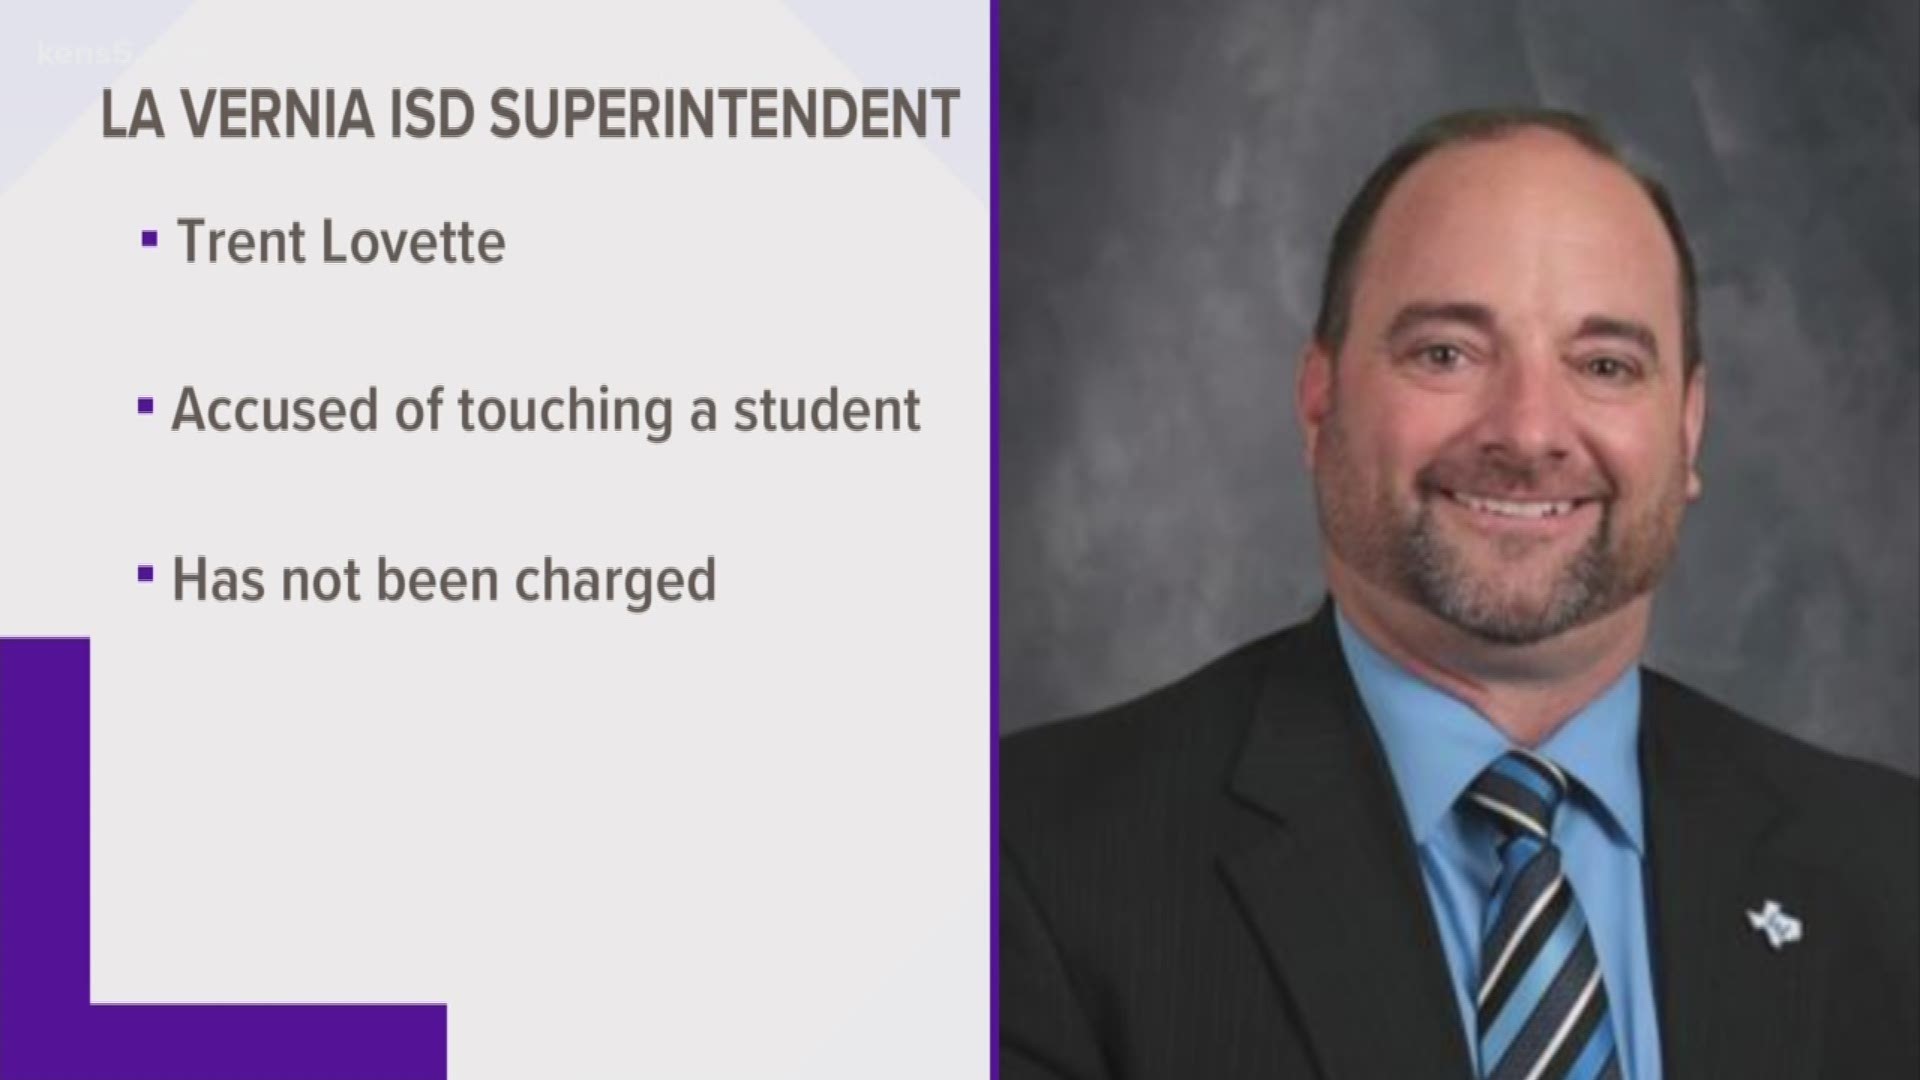 A student told authorities that Trent Lovett touched her lower back at a football game. The school board will discuss his future with the district in a special meeting Friday.